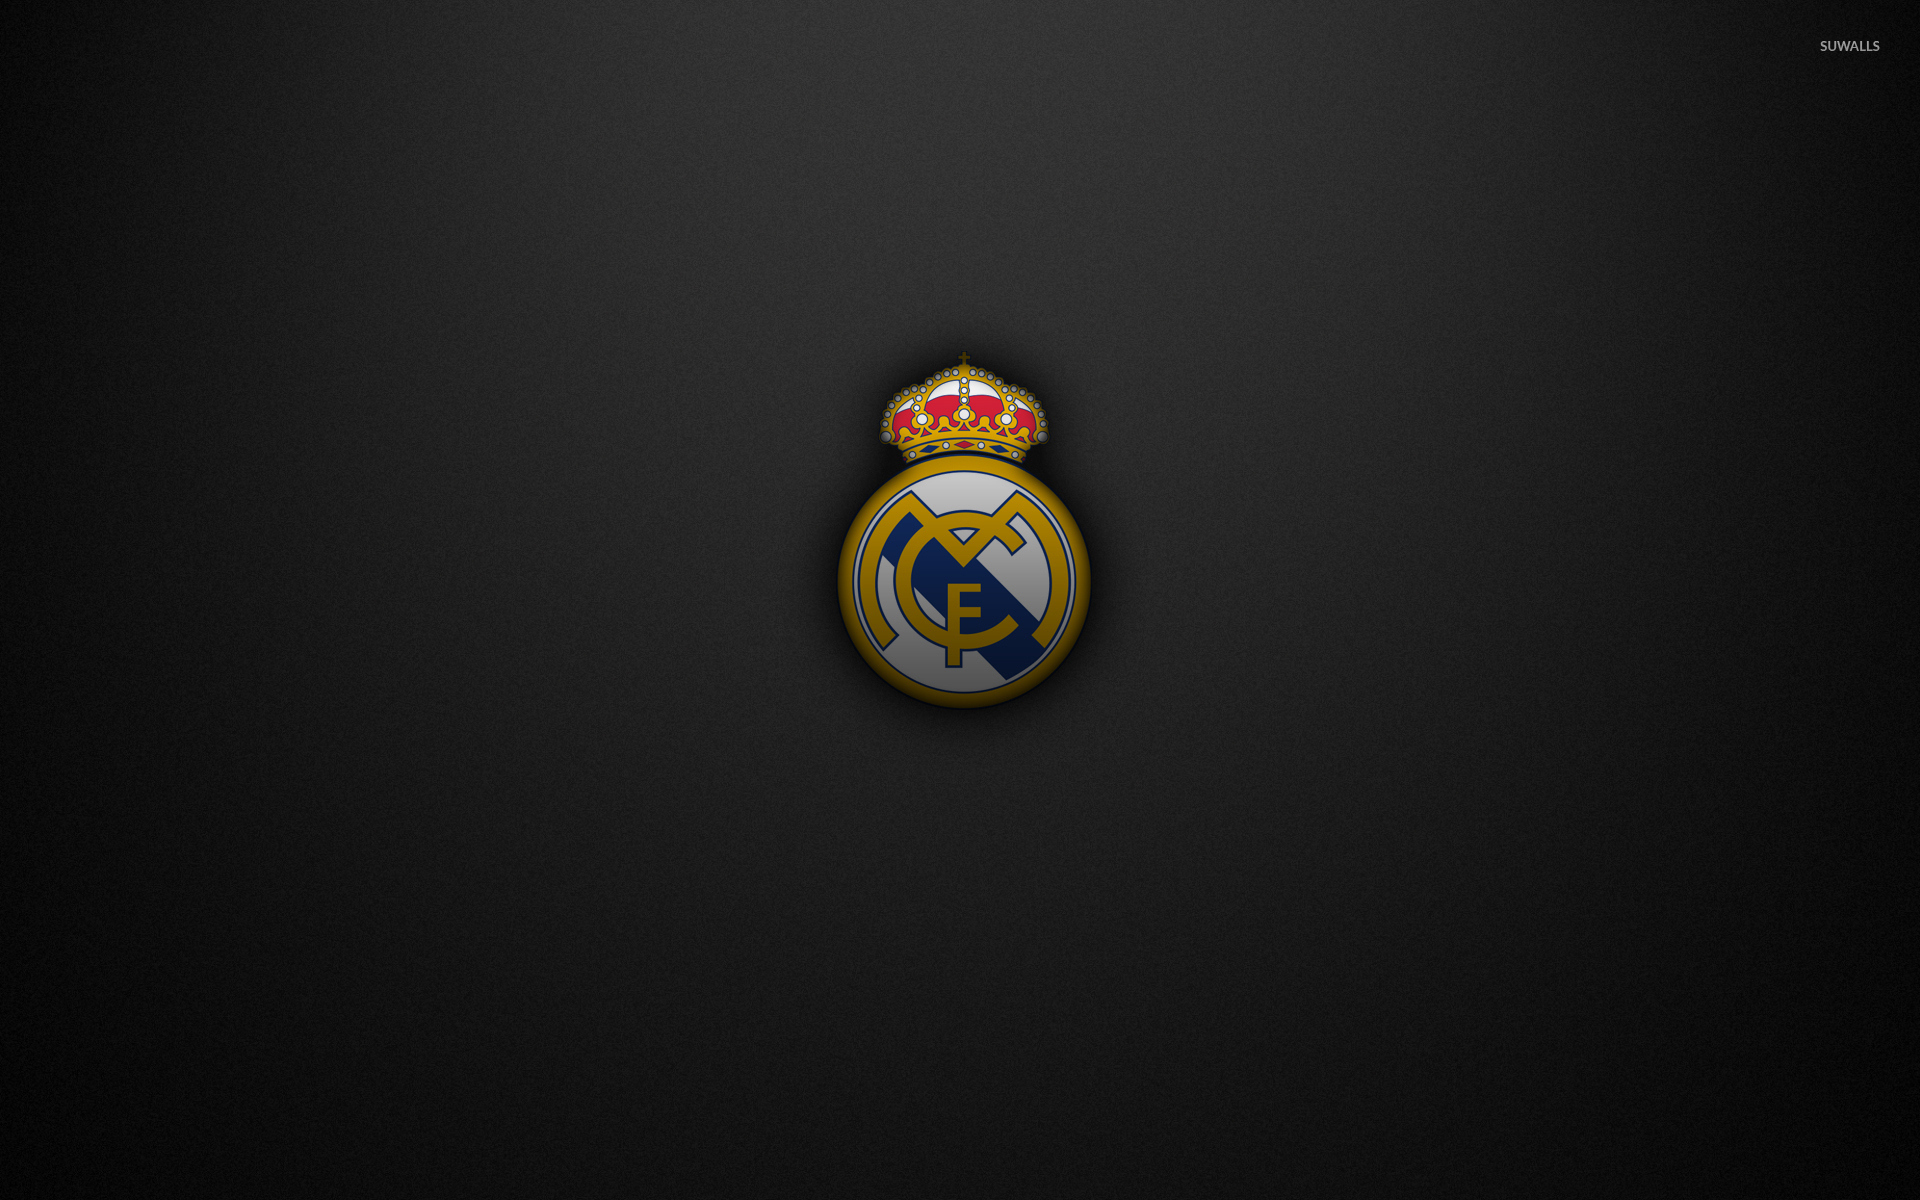 Real Madrid CF Logo On A Black Texture Background Wallpaper